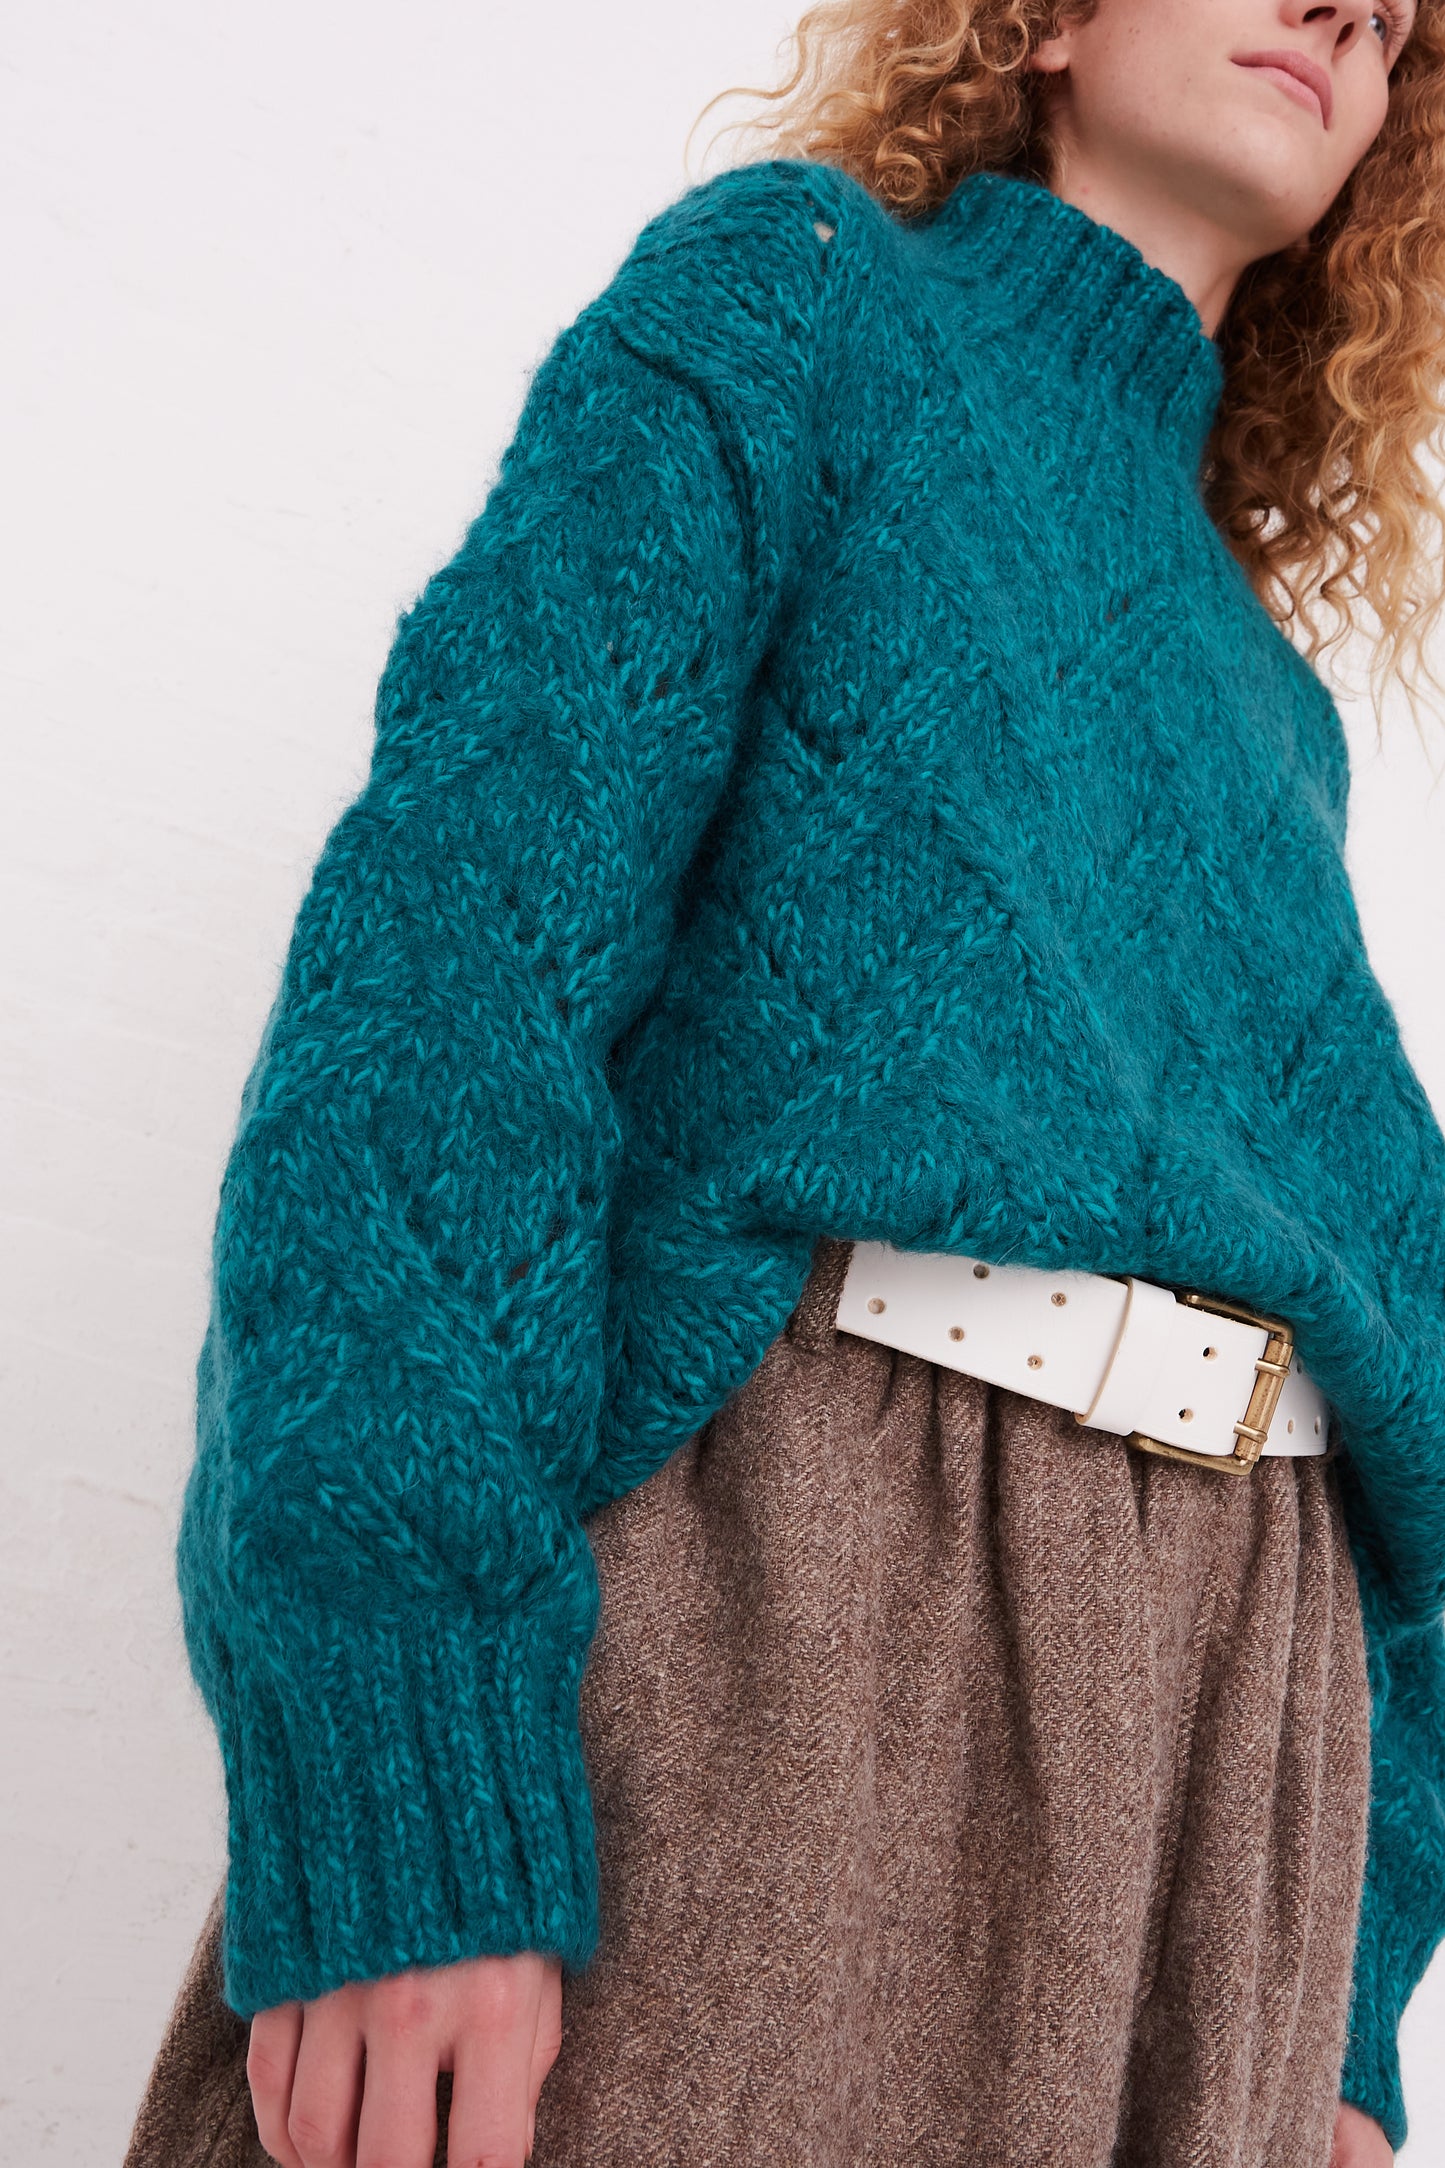 An oversized Hand-Knit Turtleneck in Green Teal by Ichi Antiquités and brown skirt.